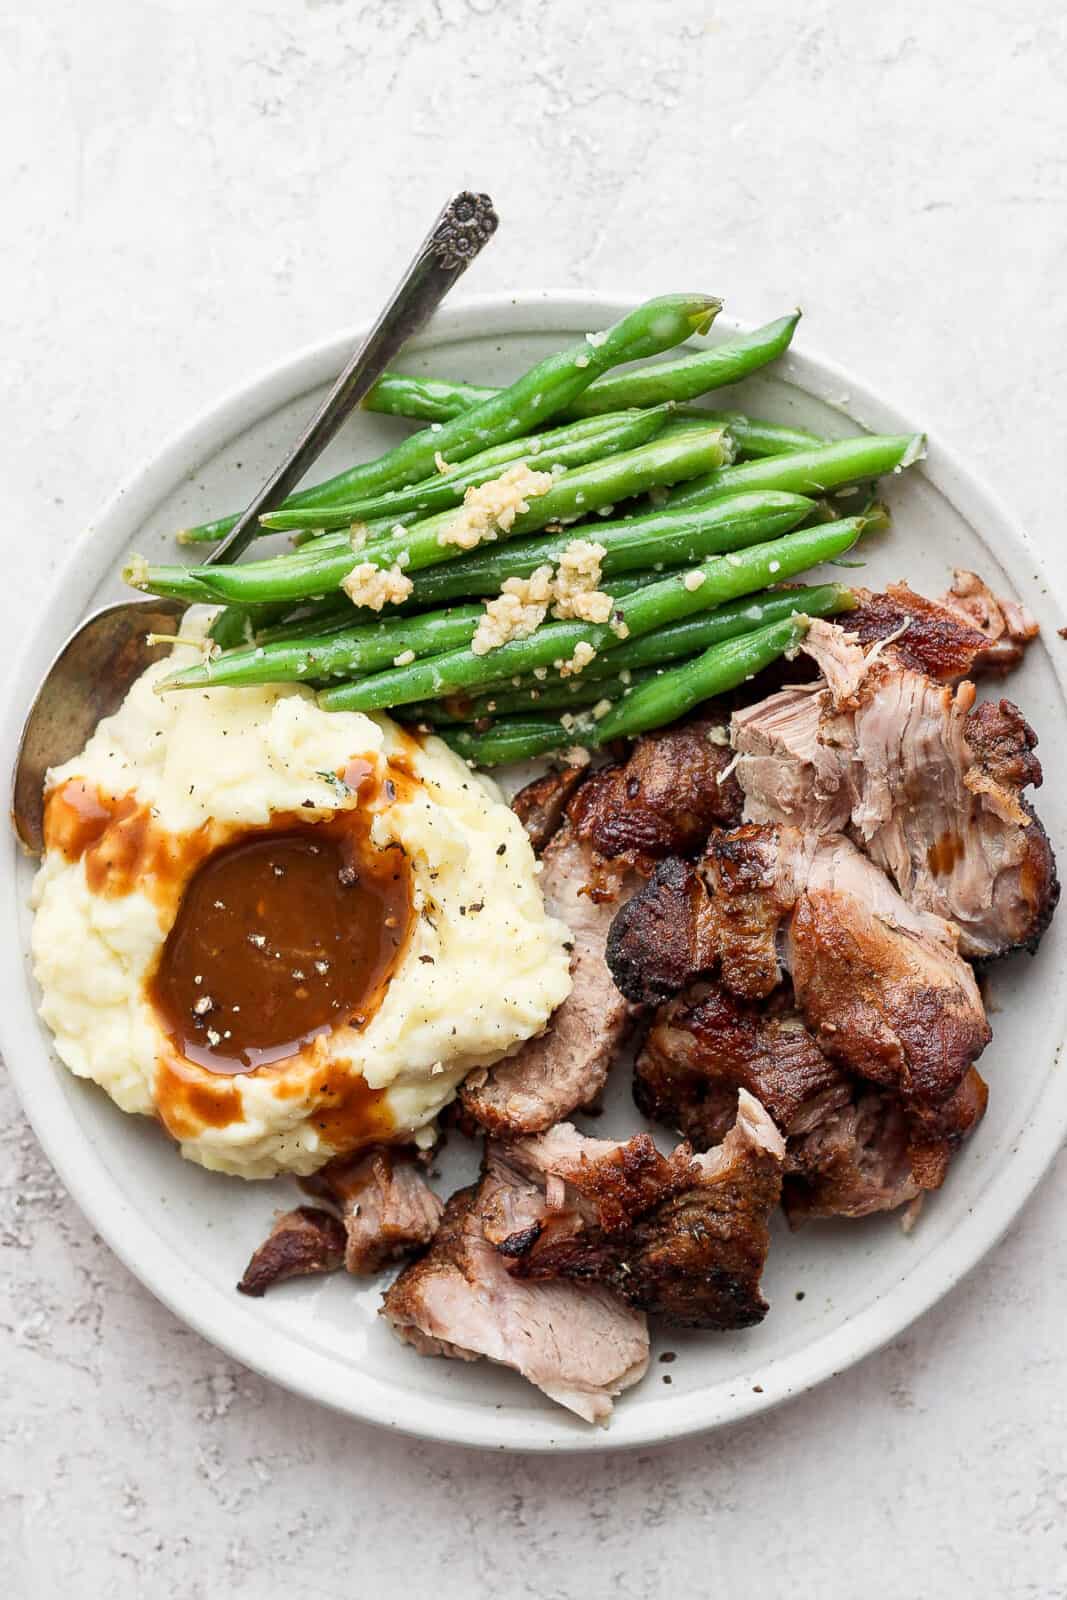 Garlic green beans on a plate with mashed potatoes and pork roast.